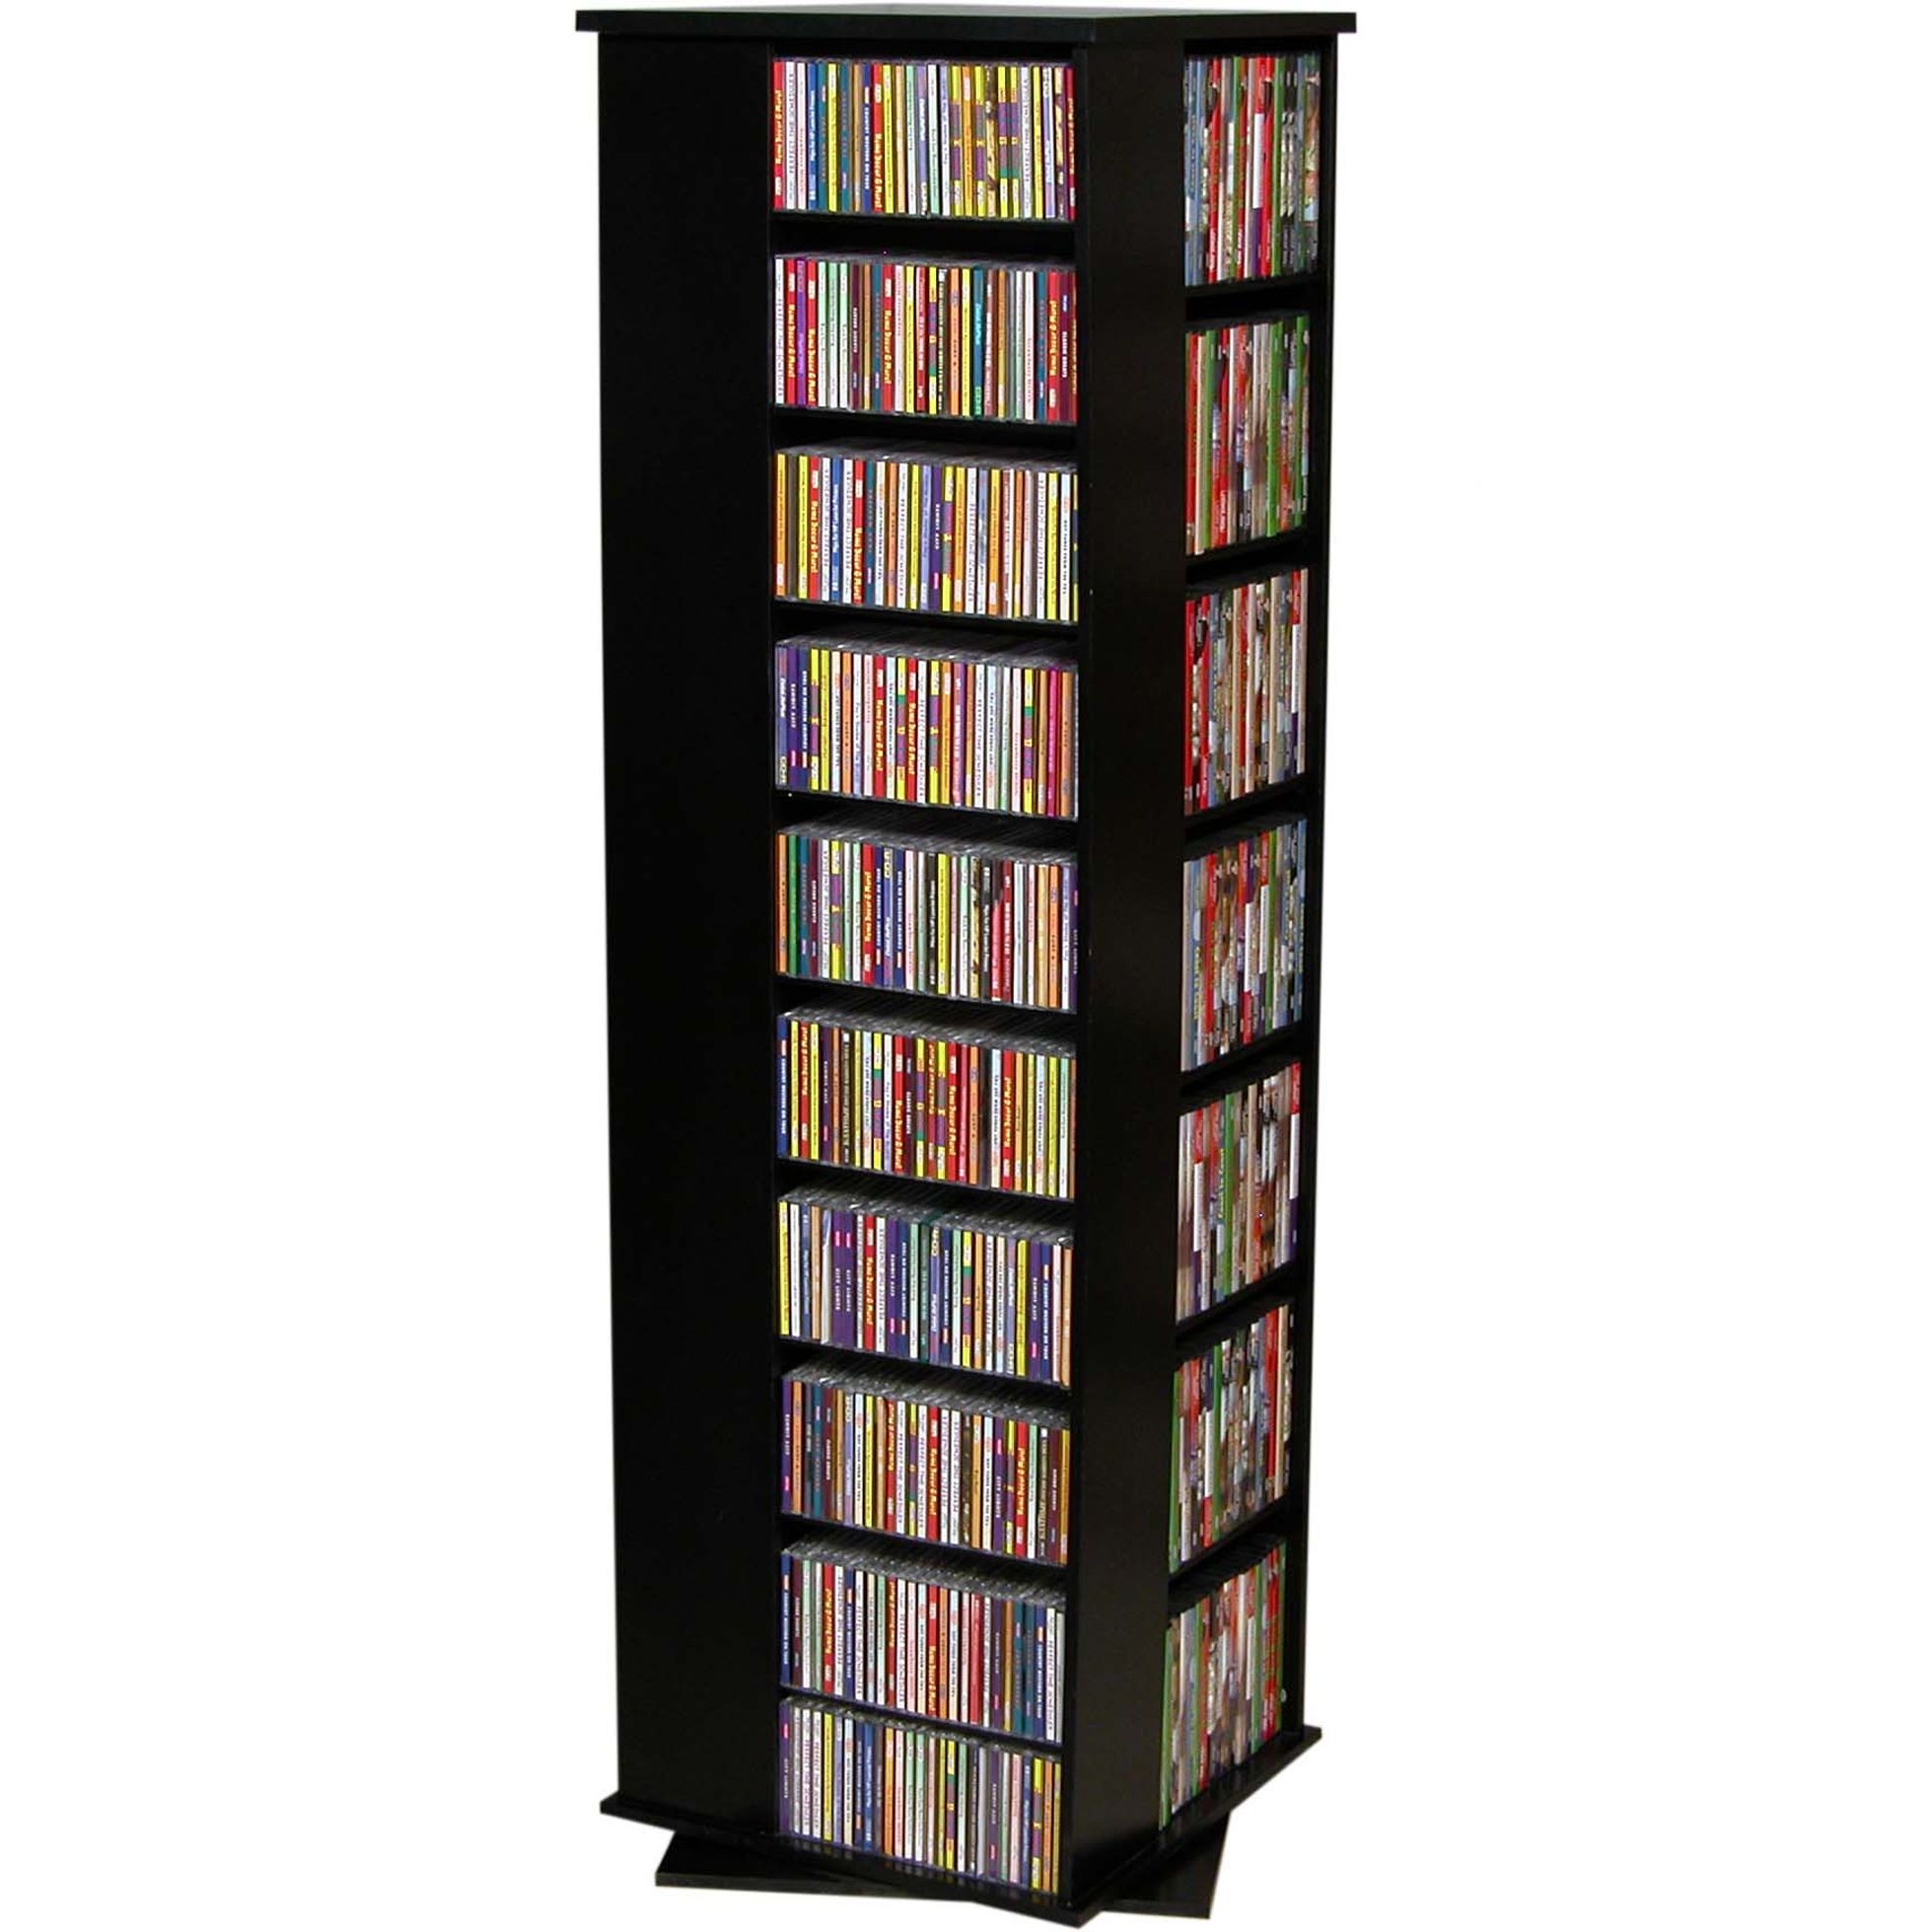 Black revolving media tower for organizing cds dvds and vhs